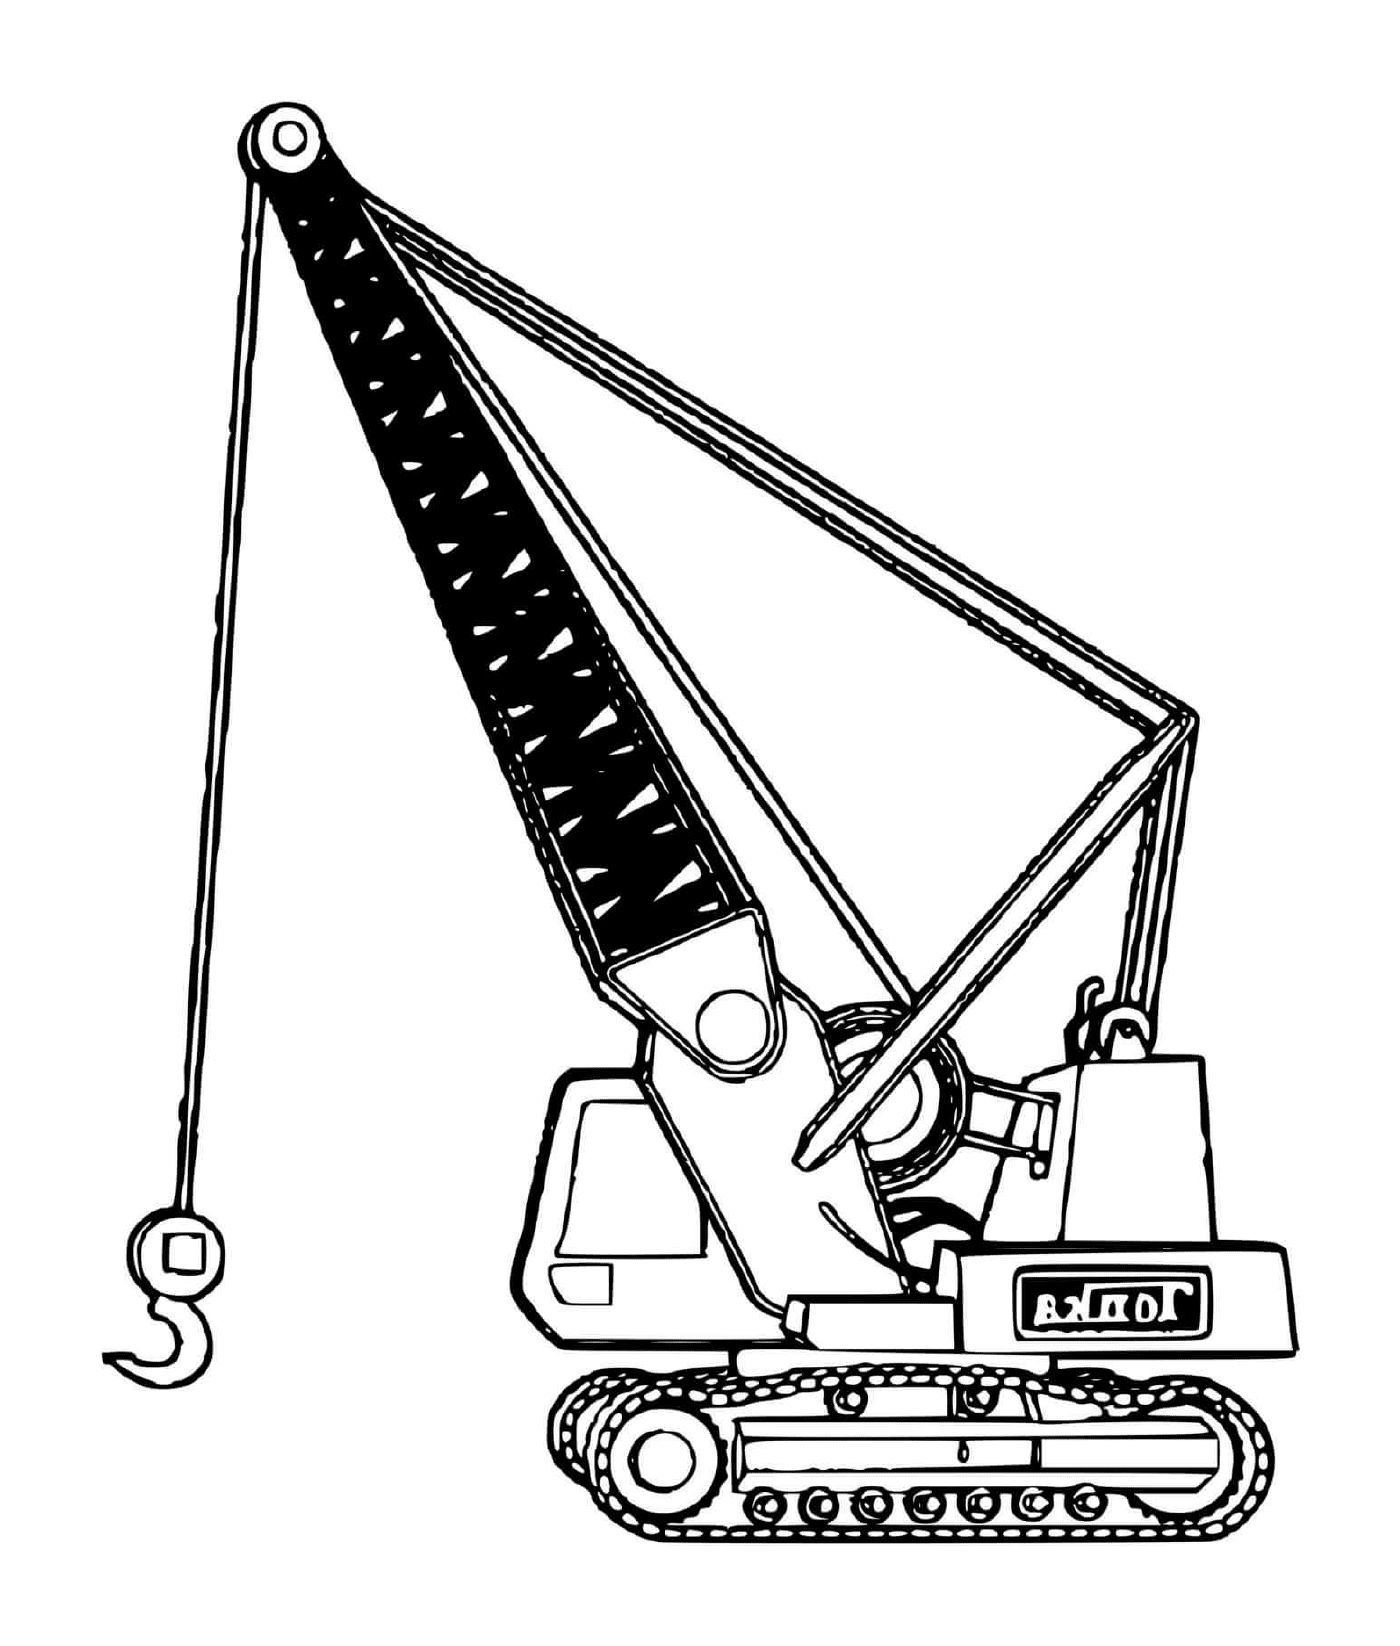  Image of a construction crane in action 